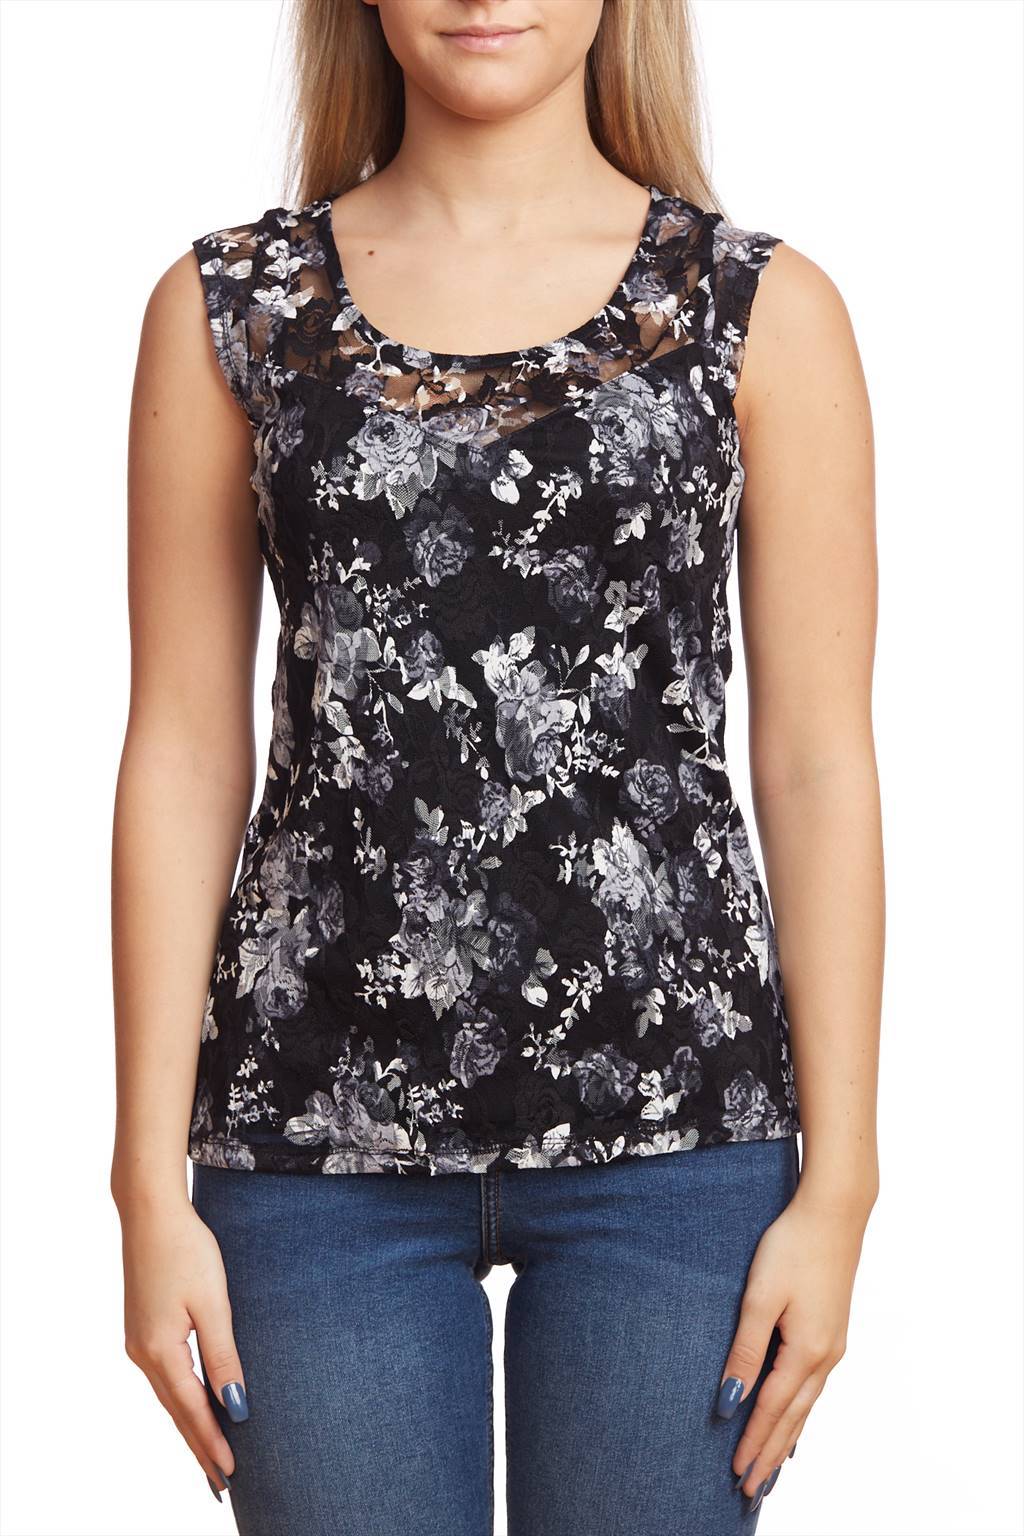 Lace floral sleeveless top